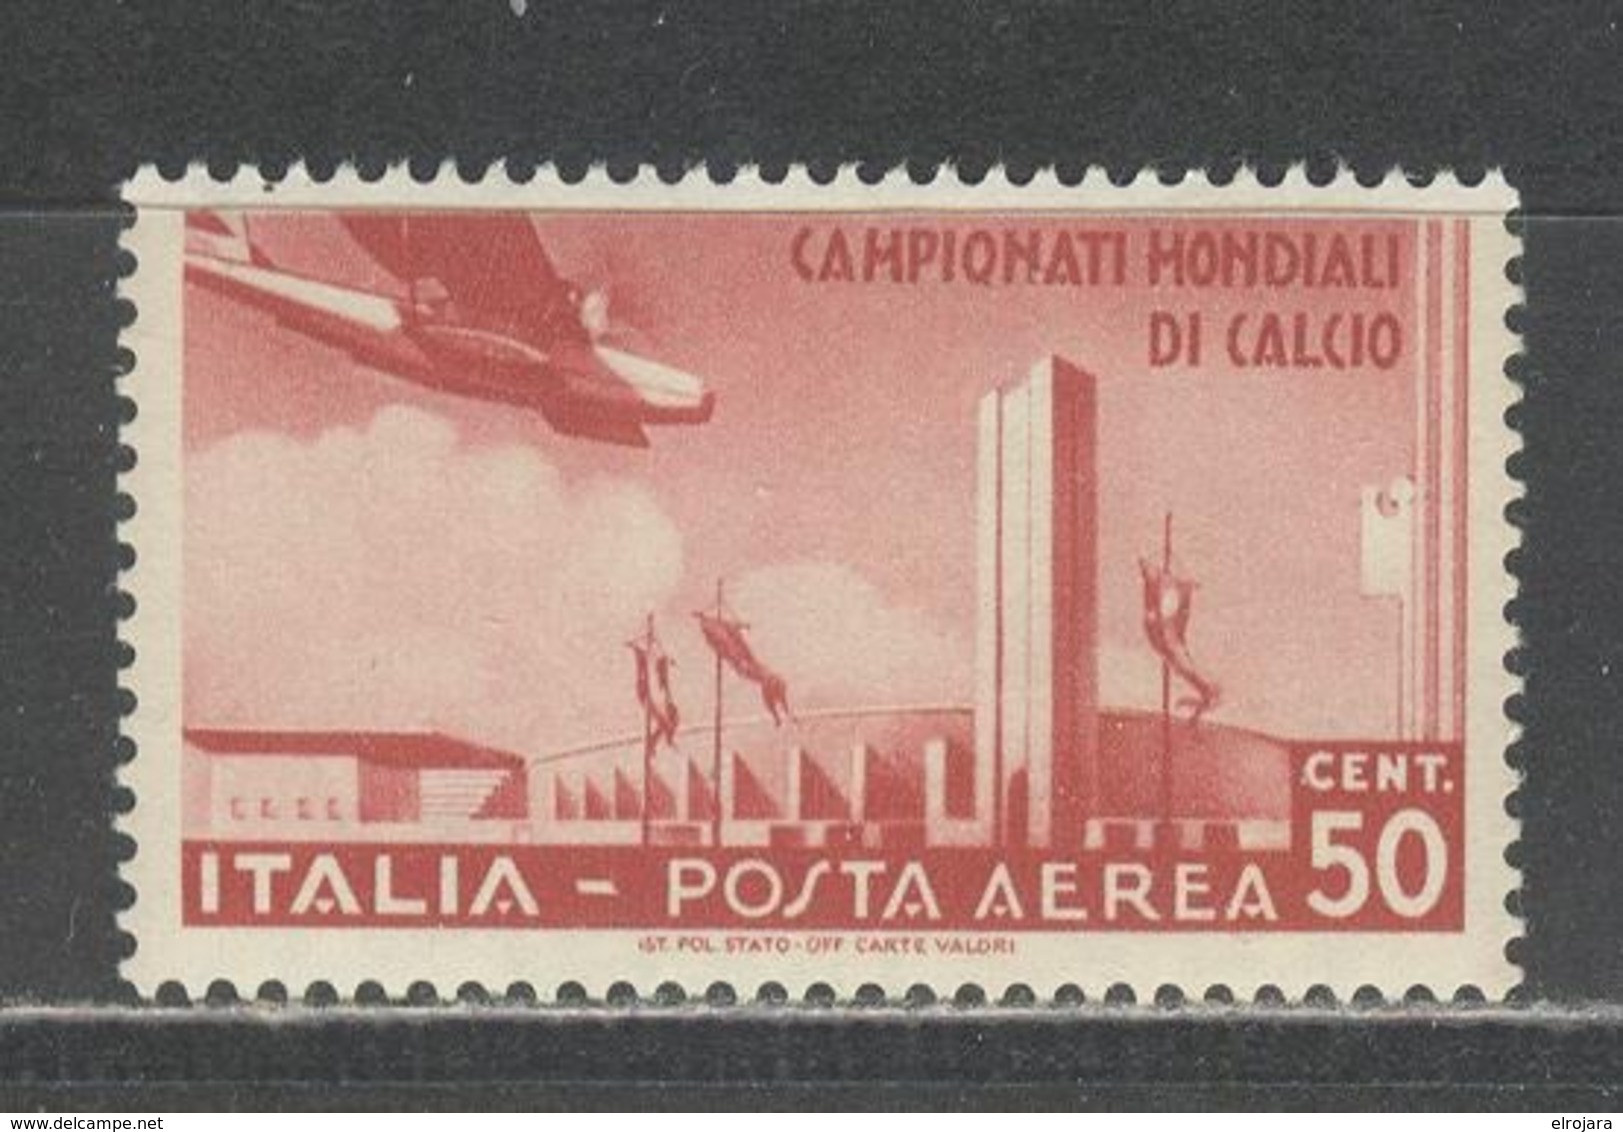 ITALY 2 Stamps Mint With Hinge - 1934 – Italien